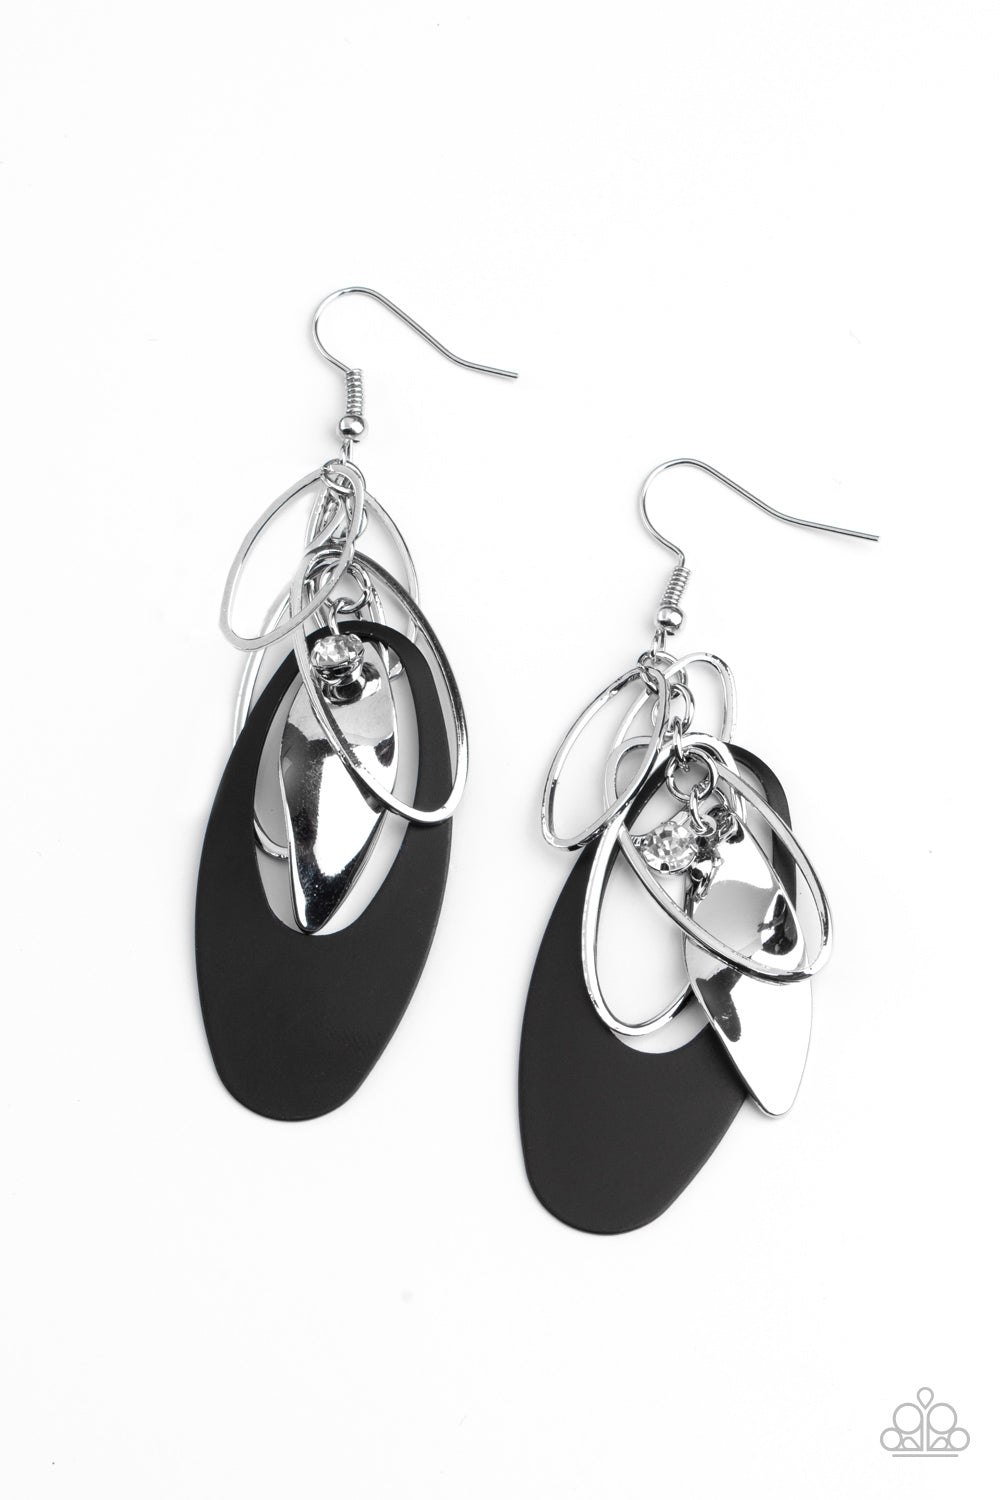 Ambitious Allure Black Earring - Paparazzi Accessories. Infused with a glassy white rhinestone, shiny silver ovals, a twisted silver plate, and an oversized black frame trickle along a shimmery silver chain, creating a noise-making tassel. Earring attaches to a standard fishhook fitting.  All Paparazzi Accessories are lead free and nickel free!  Sold as one pair of earrings.